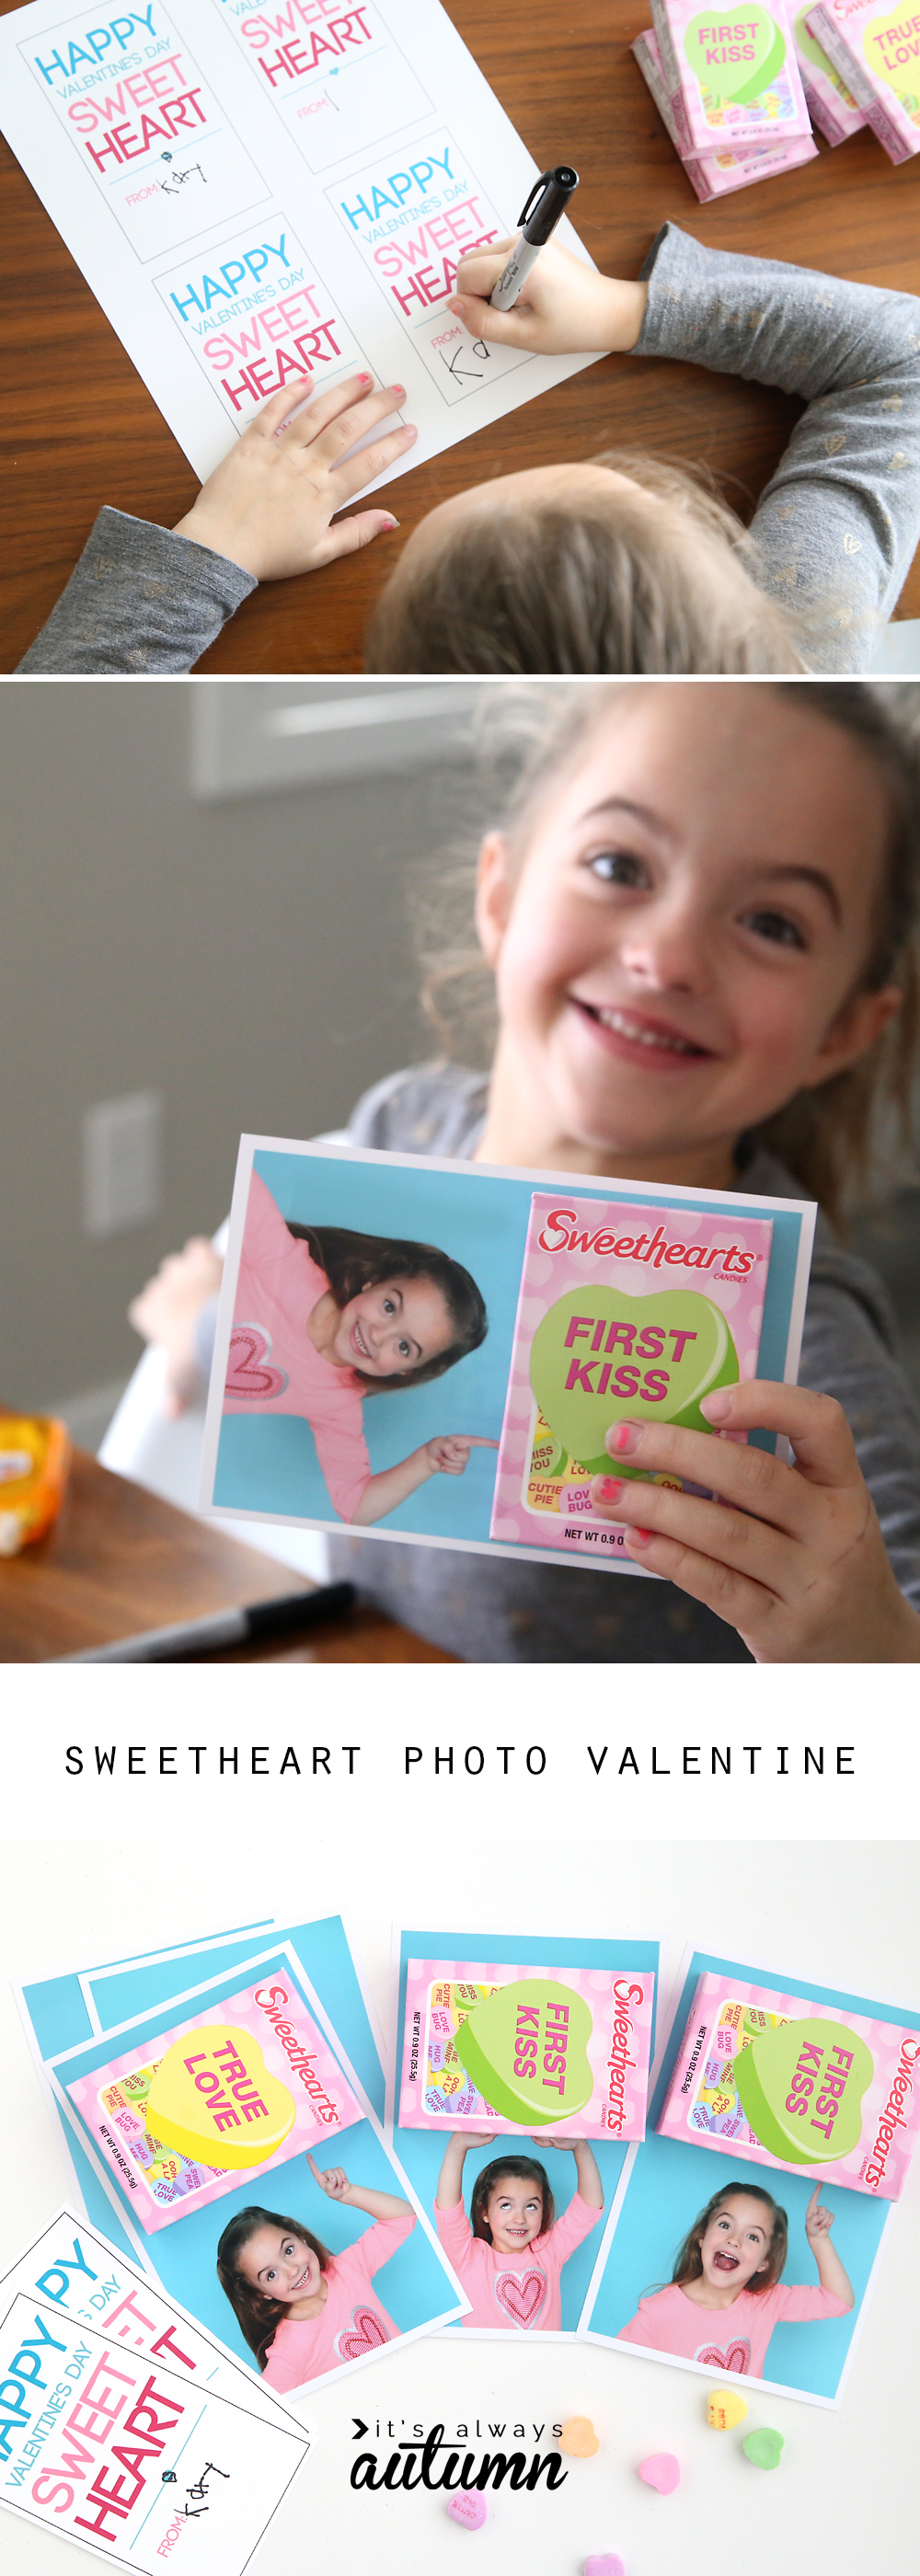 Little girl holding a sweethearts valentines day photo card